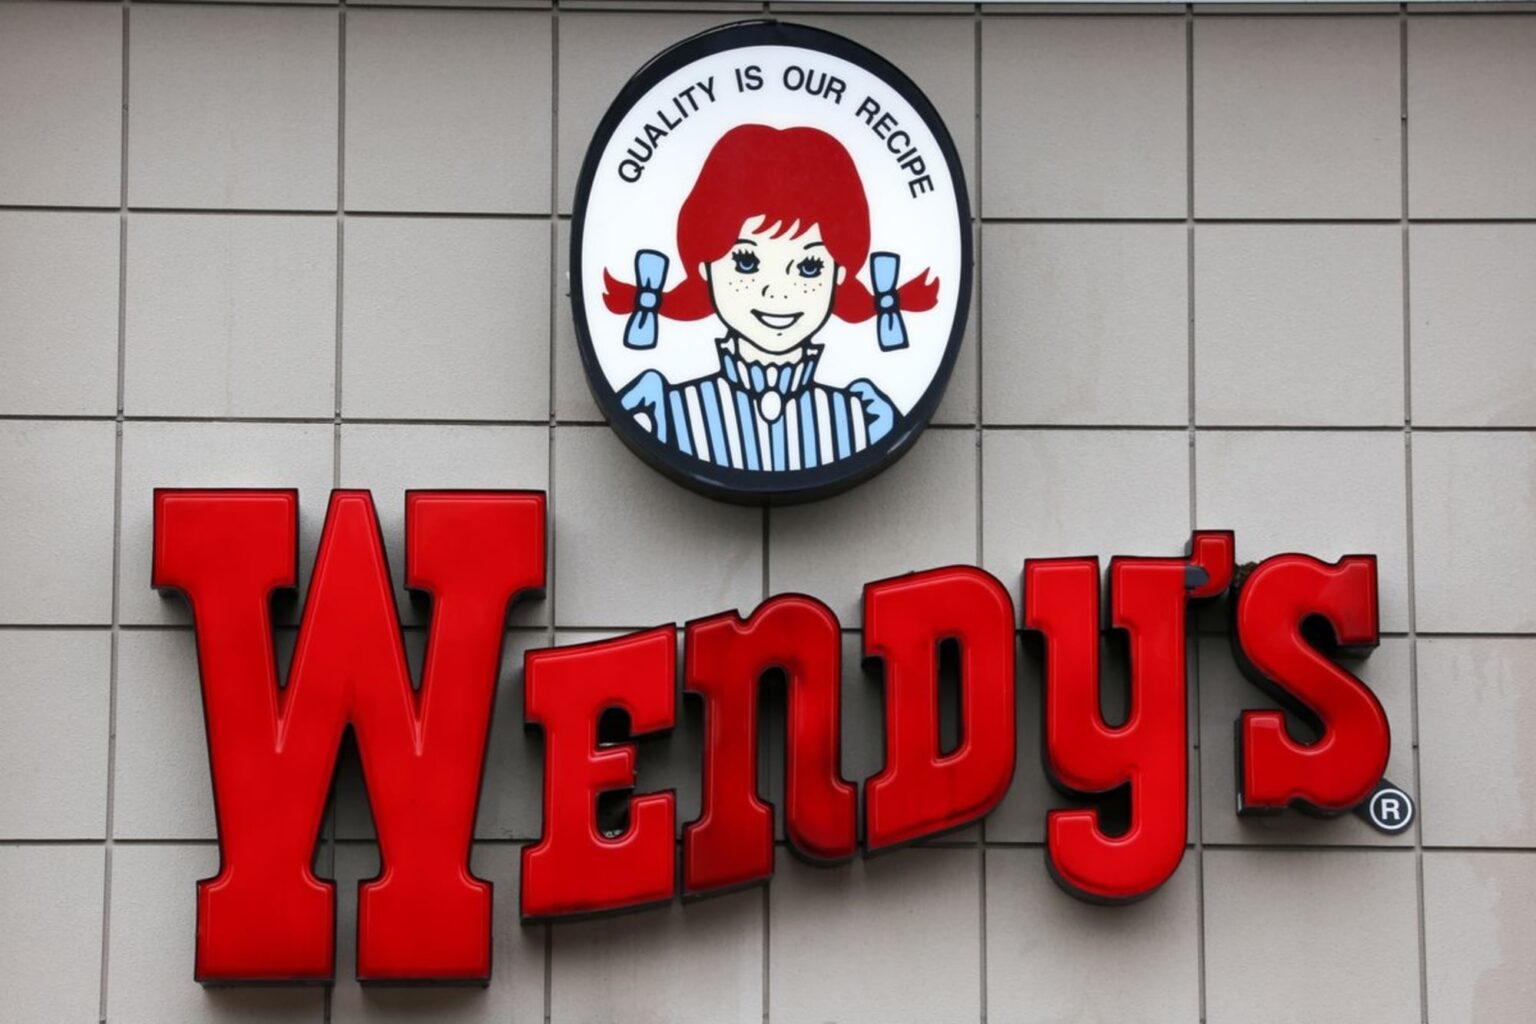 Did you get roasted this year? Because Wendy's Twitter feed is flooded with the best roasts of 2021! Take a look at Wendy's #NationalRoastDay memes.